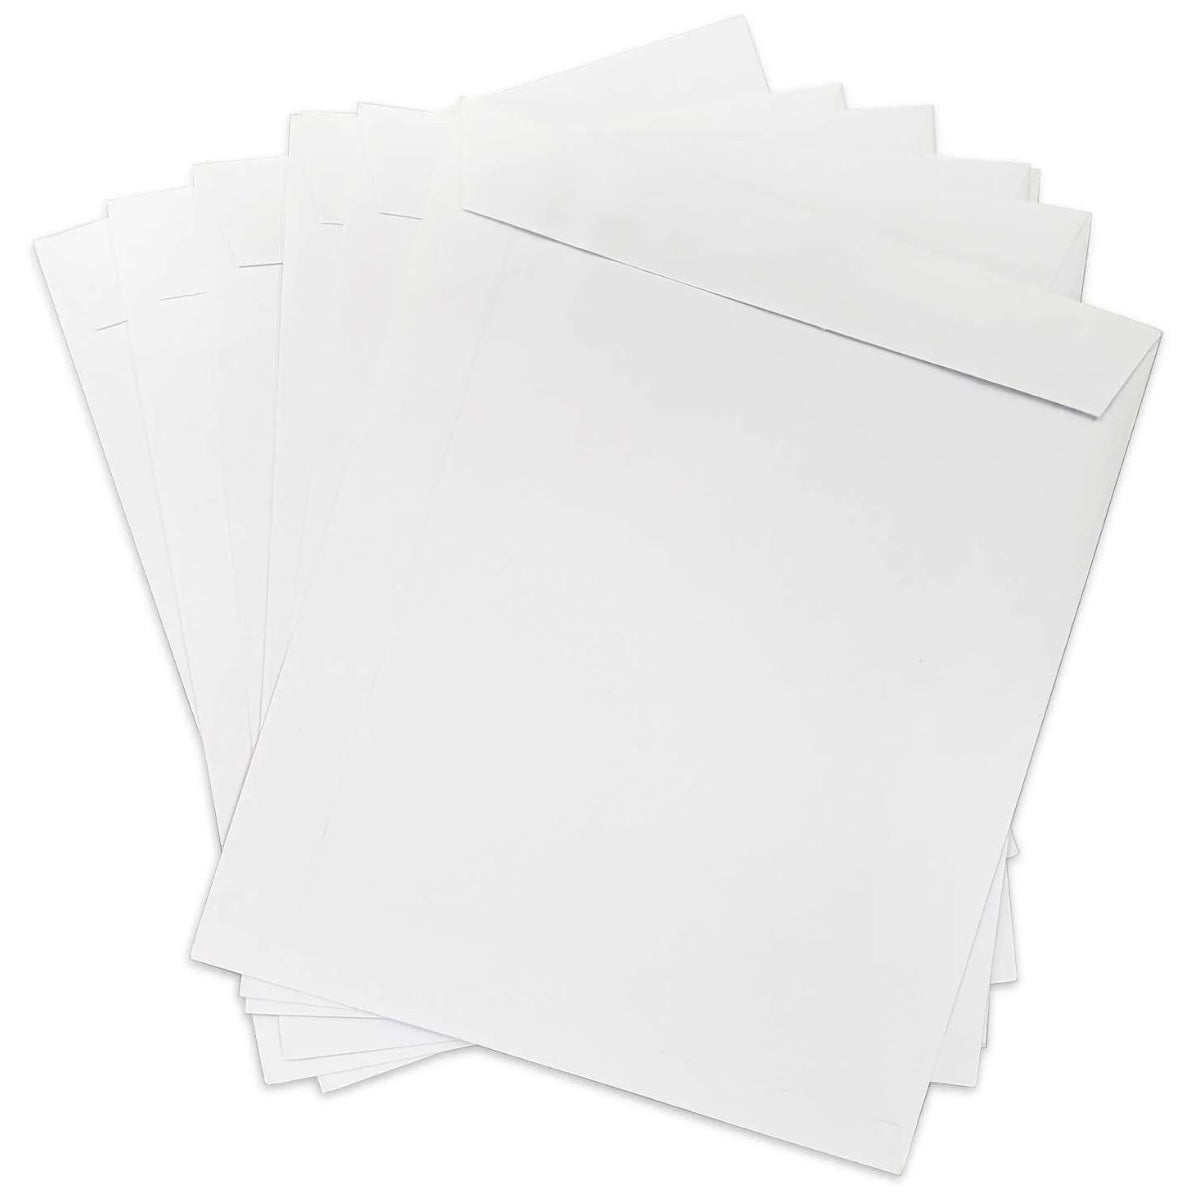 Hispapel Envelope 305 x 254 mm, 12 x 10 inches, US Letter, 100gsm, White